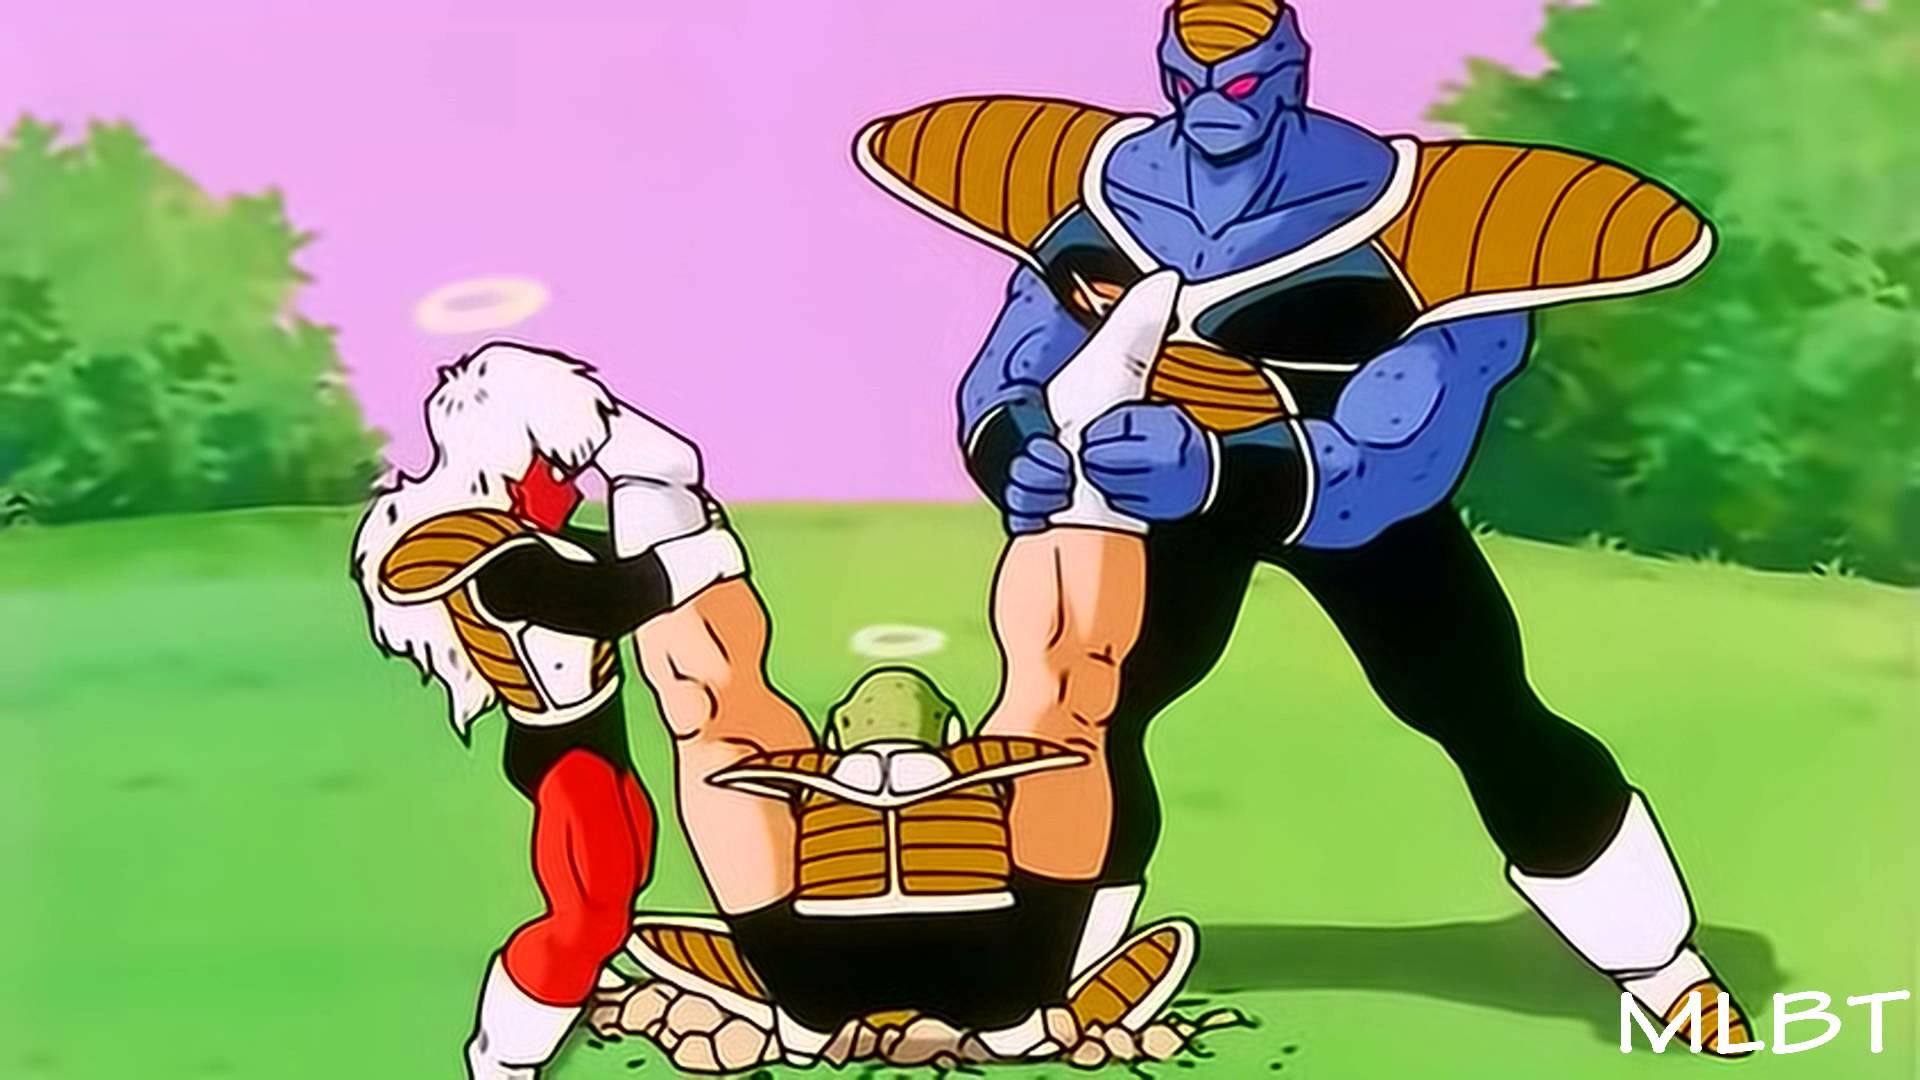 DBZ Z-fighters vs Ginyu Force [part 1/2] 【1080p HD】remastered ...